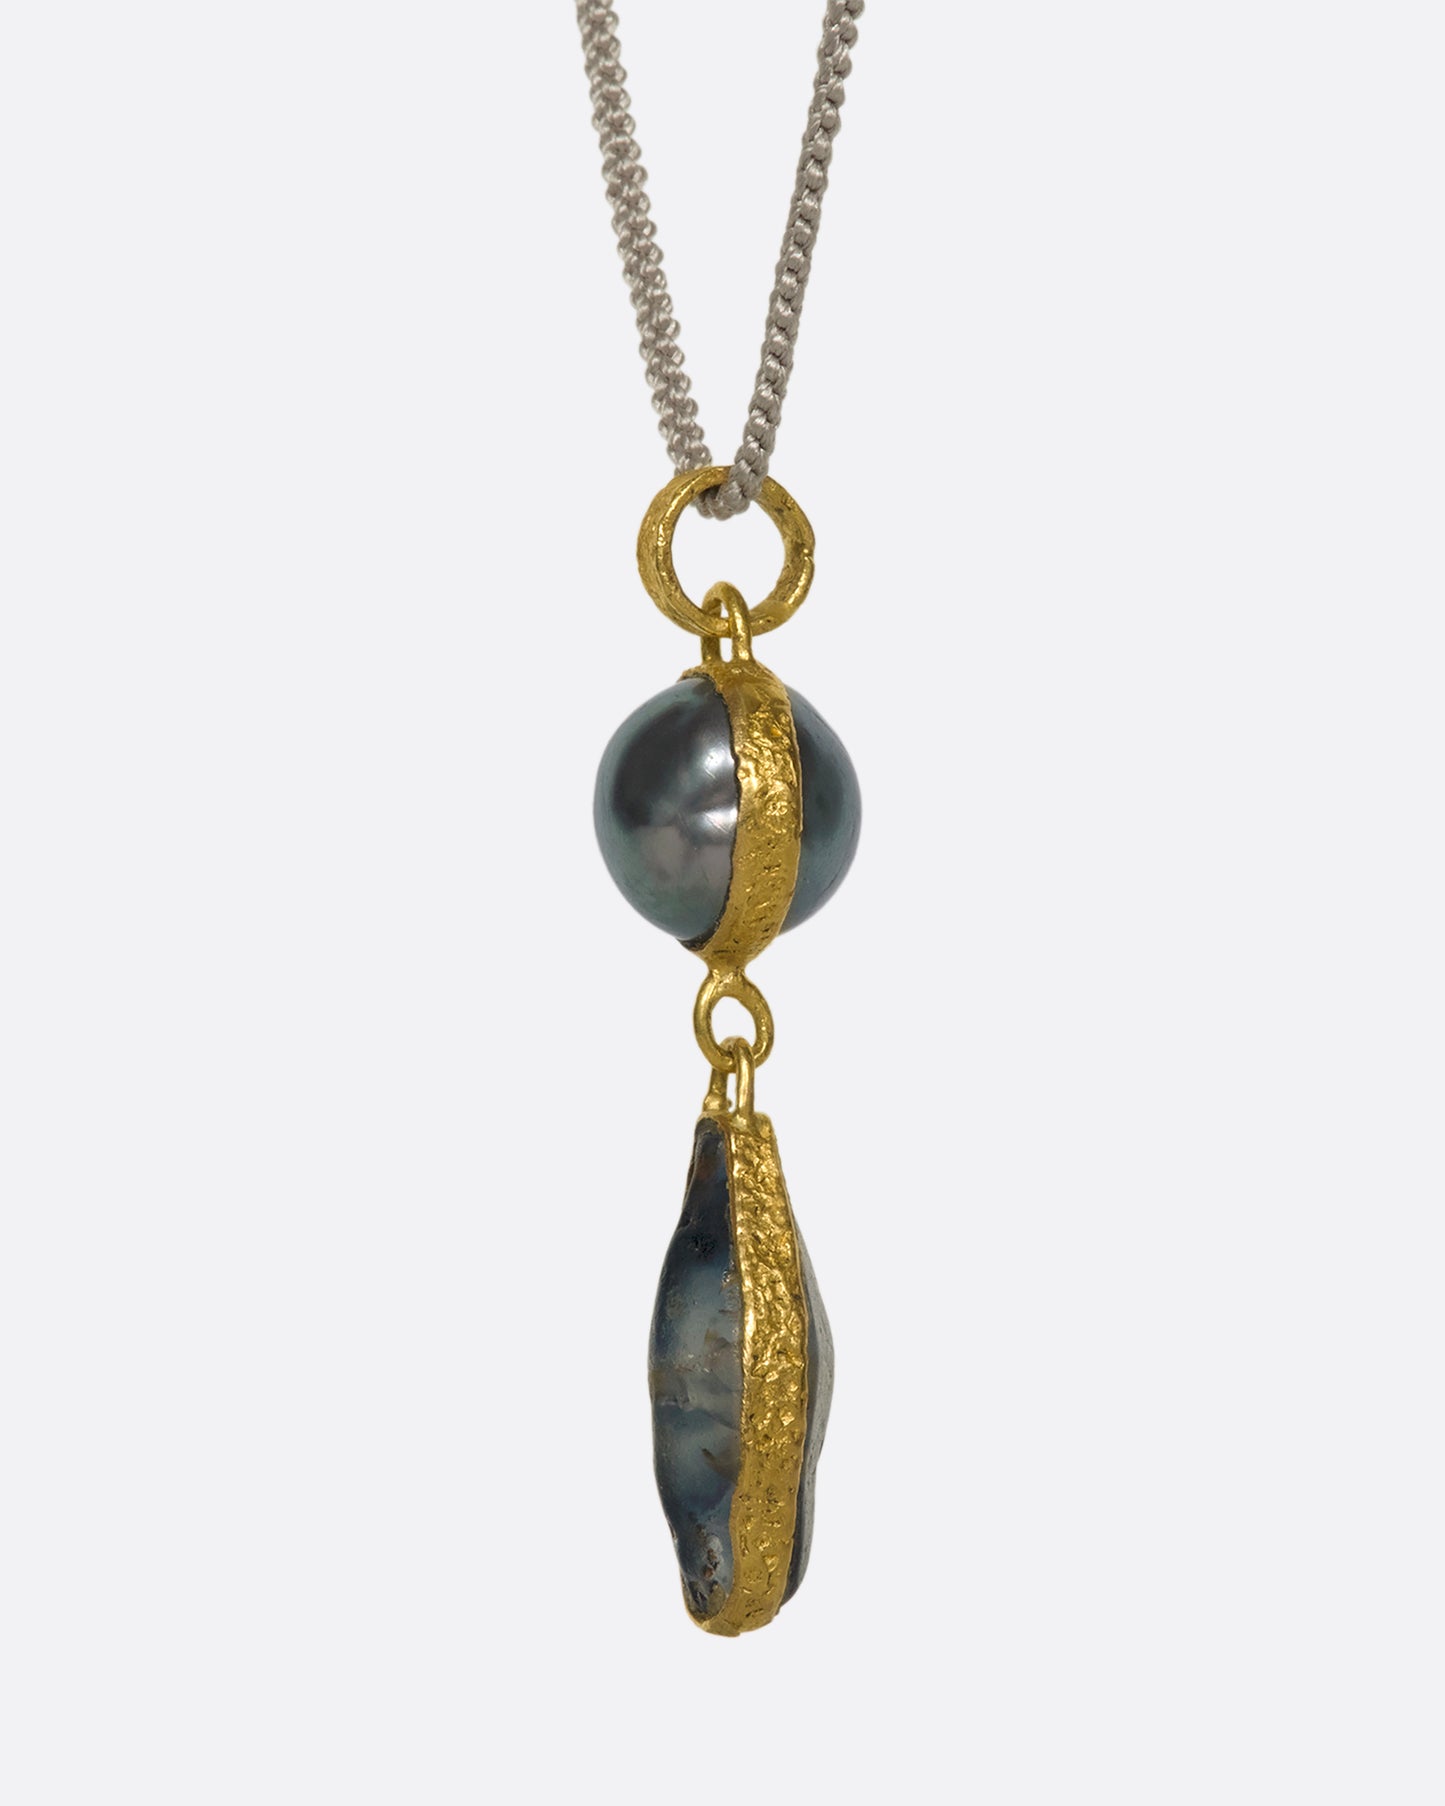 A close up of a yellow gold pendant with a pearl and Sri Lankan sapphire on a cord.